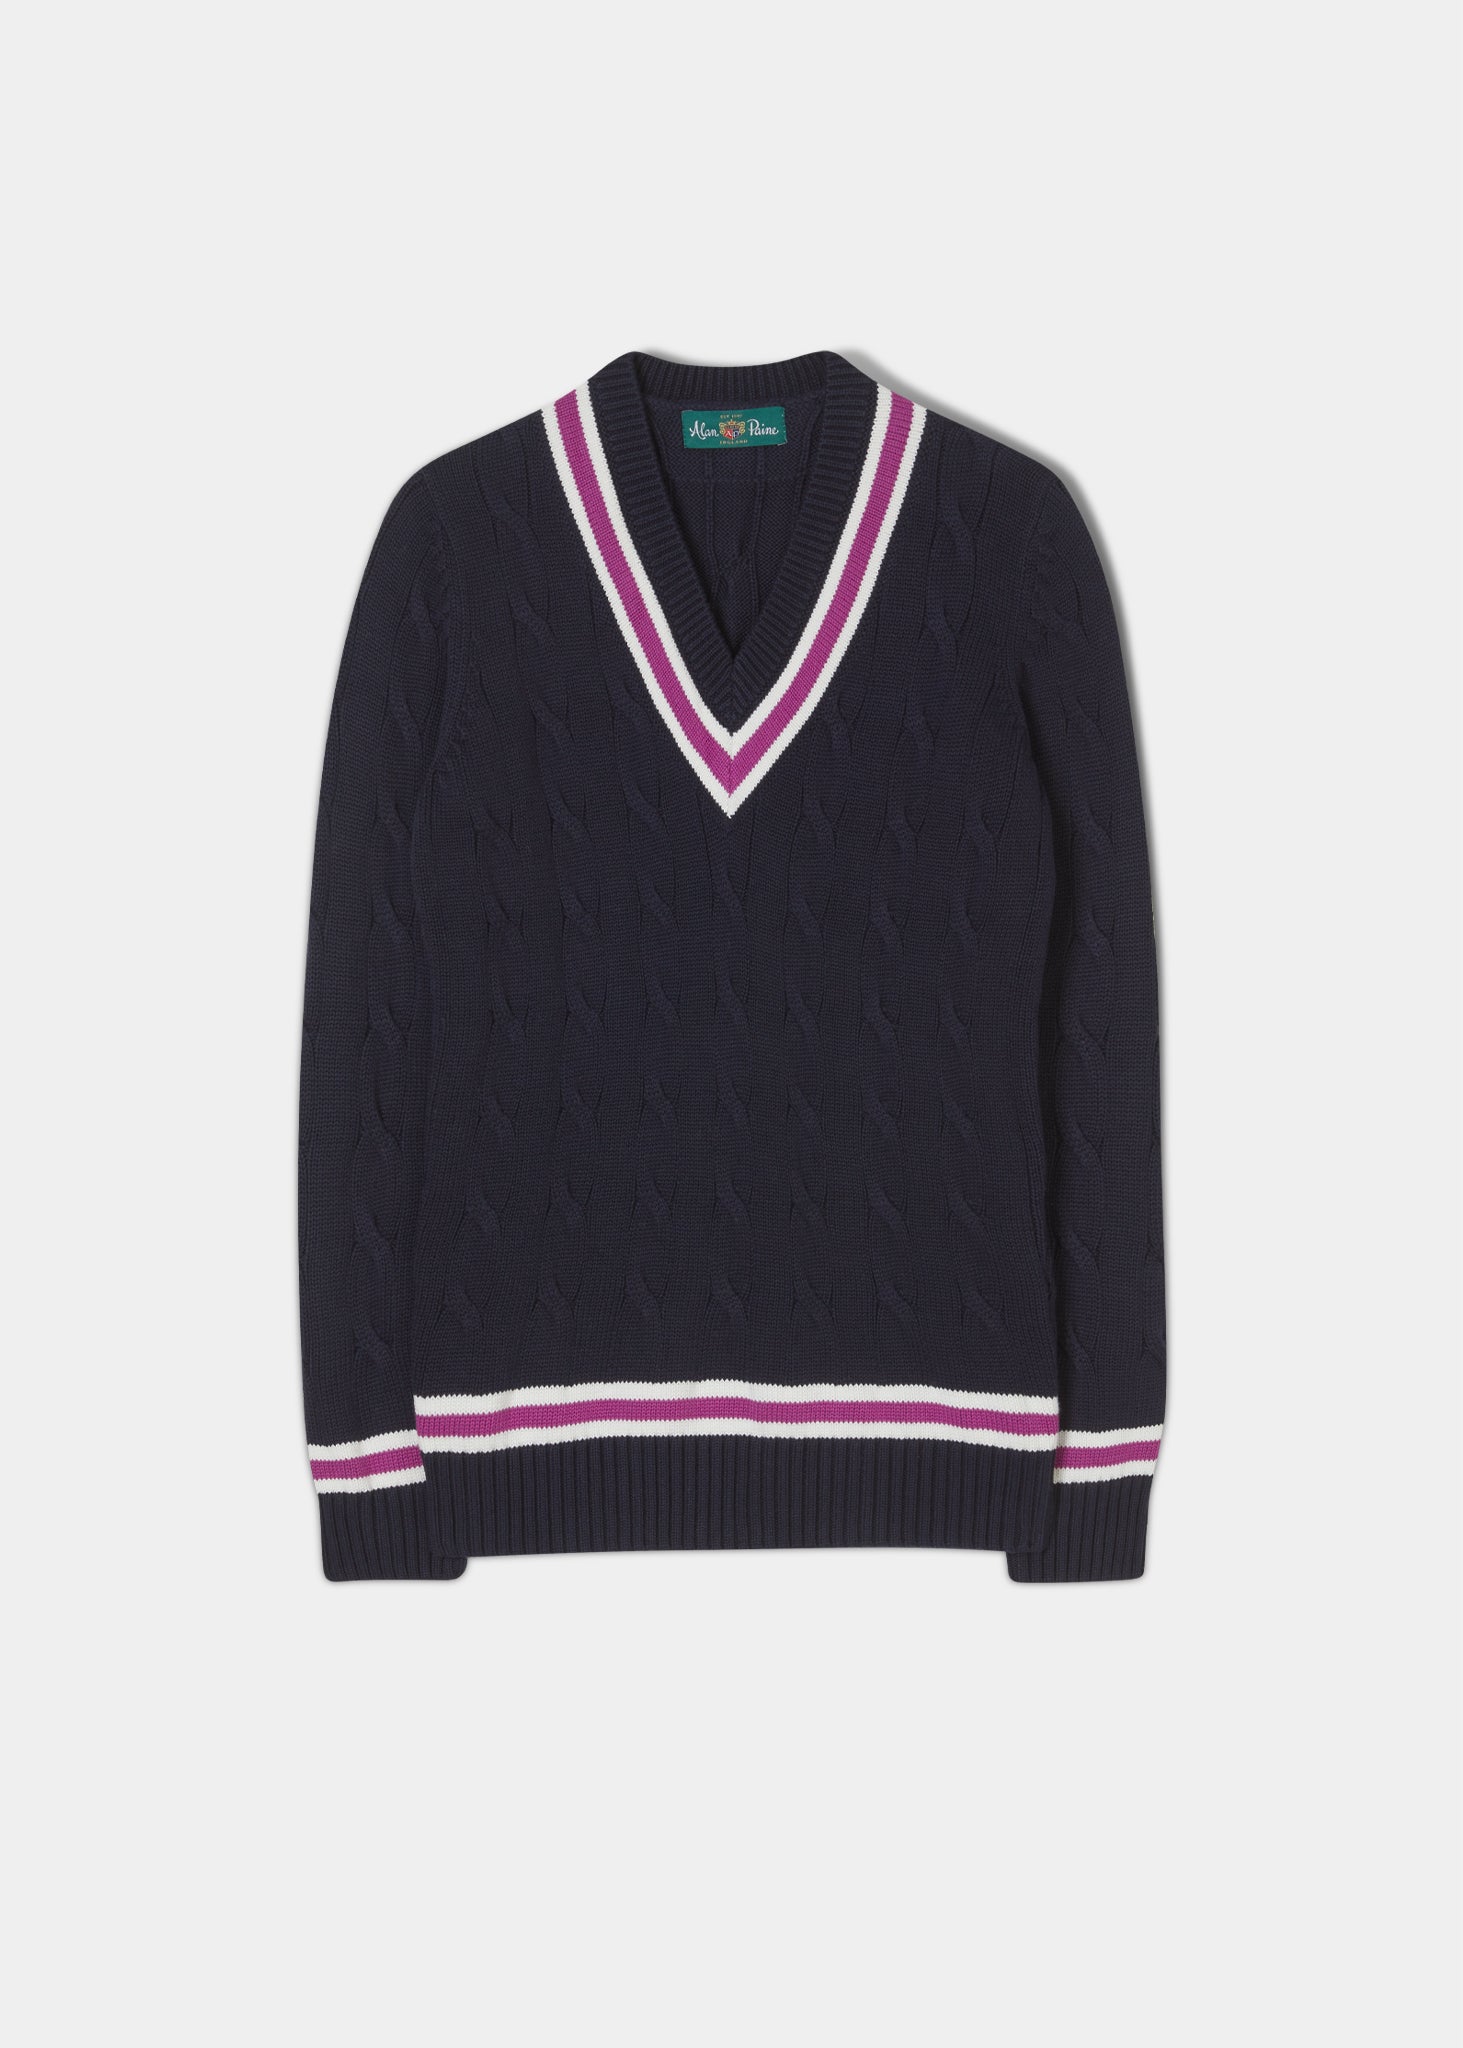 Men's Cricket Jumpers | Cable Knit Cricket Sweaters – Alan Paine